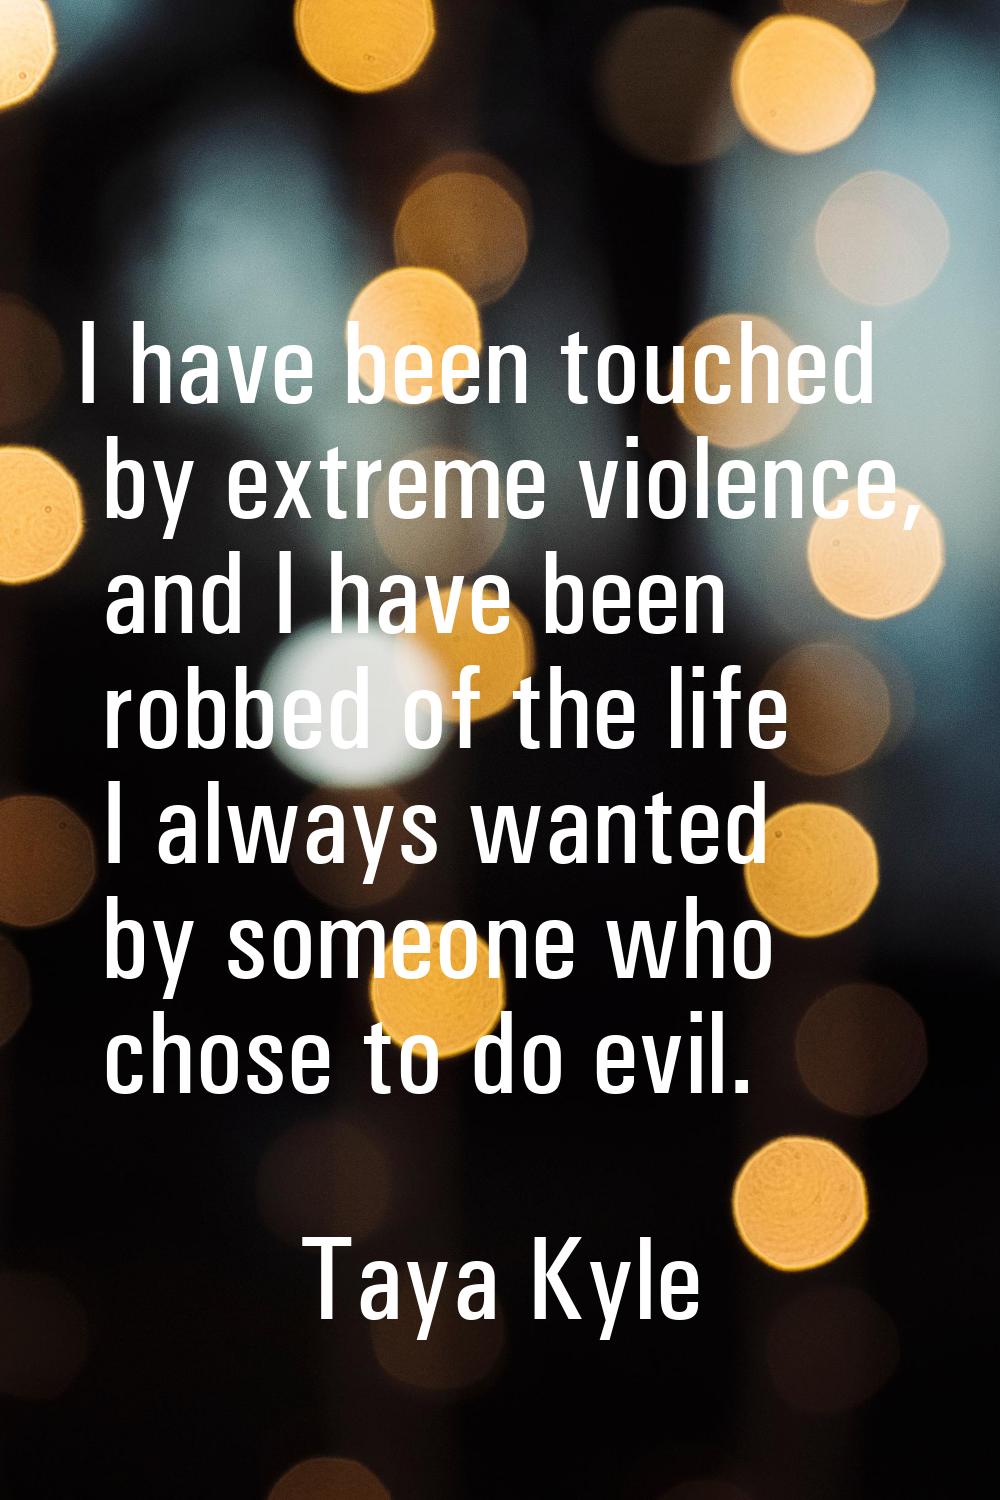 I have been touched by extreme violence, and I have been robbed of the life I always wanted by some